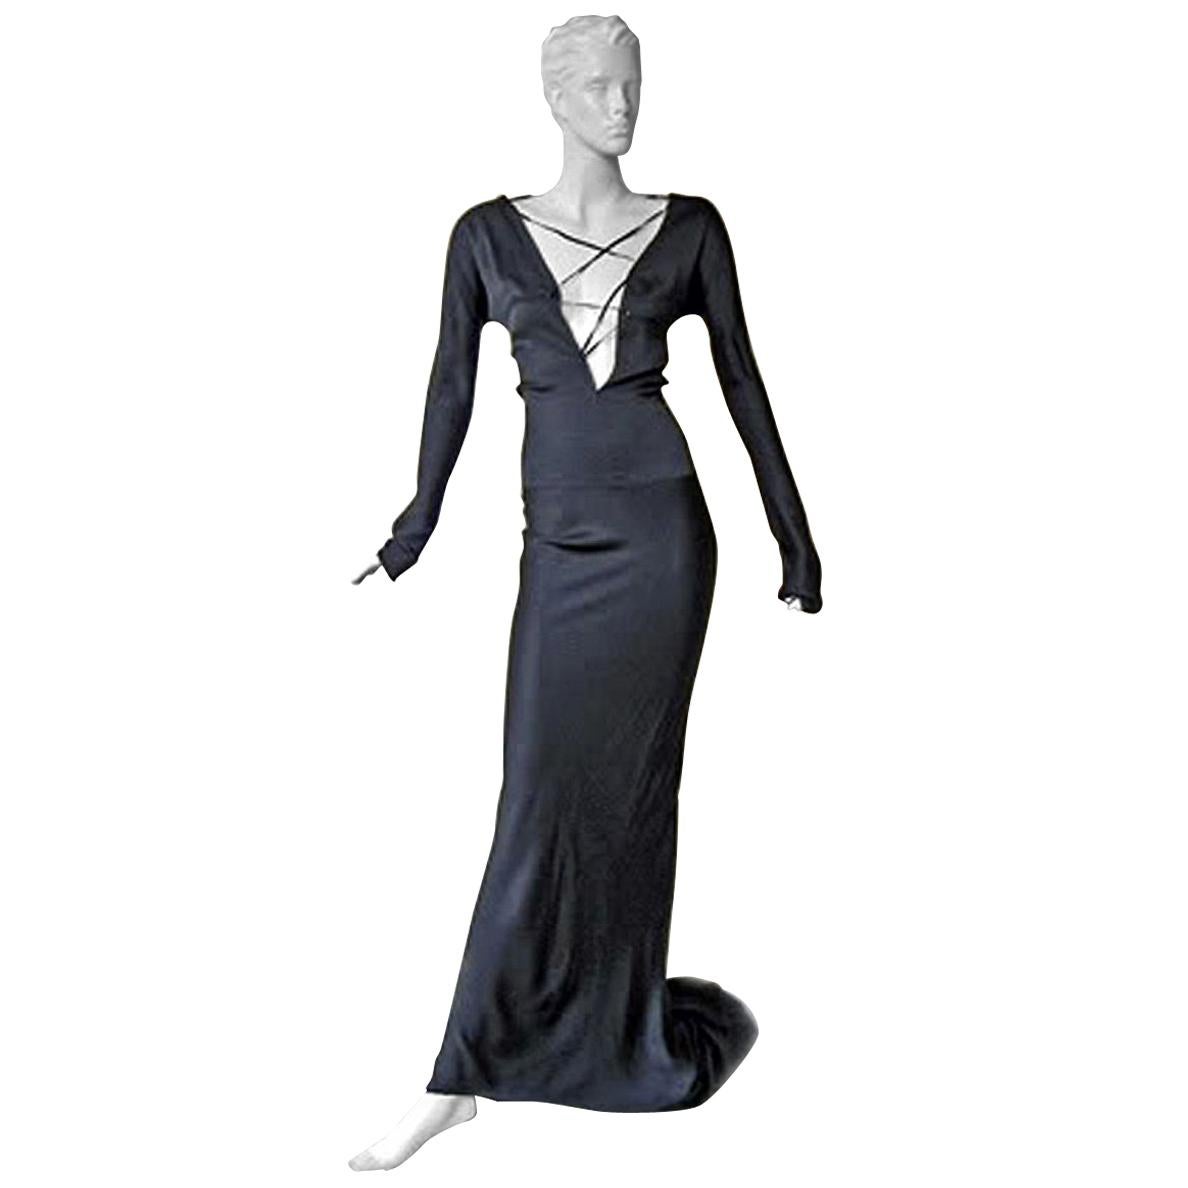 Gucci by Tom Ford 2002 Helen Hunt Dress Gown Worn on Red Carpet  New!